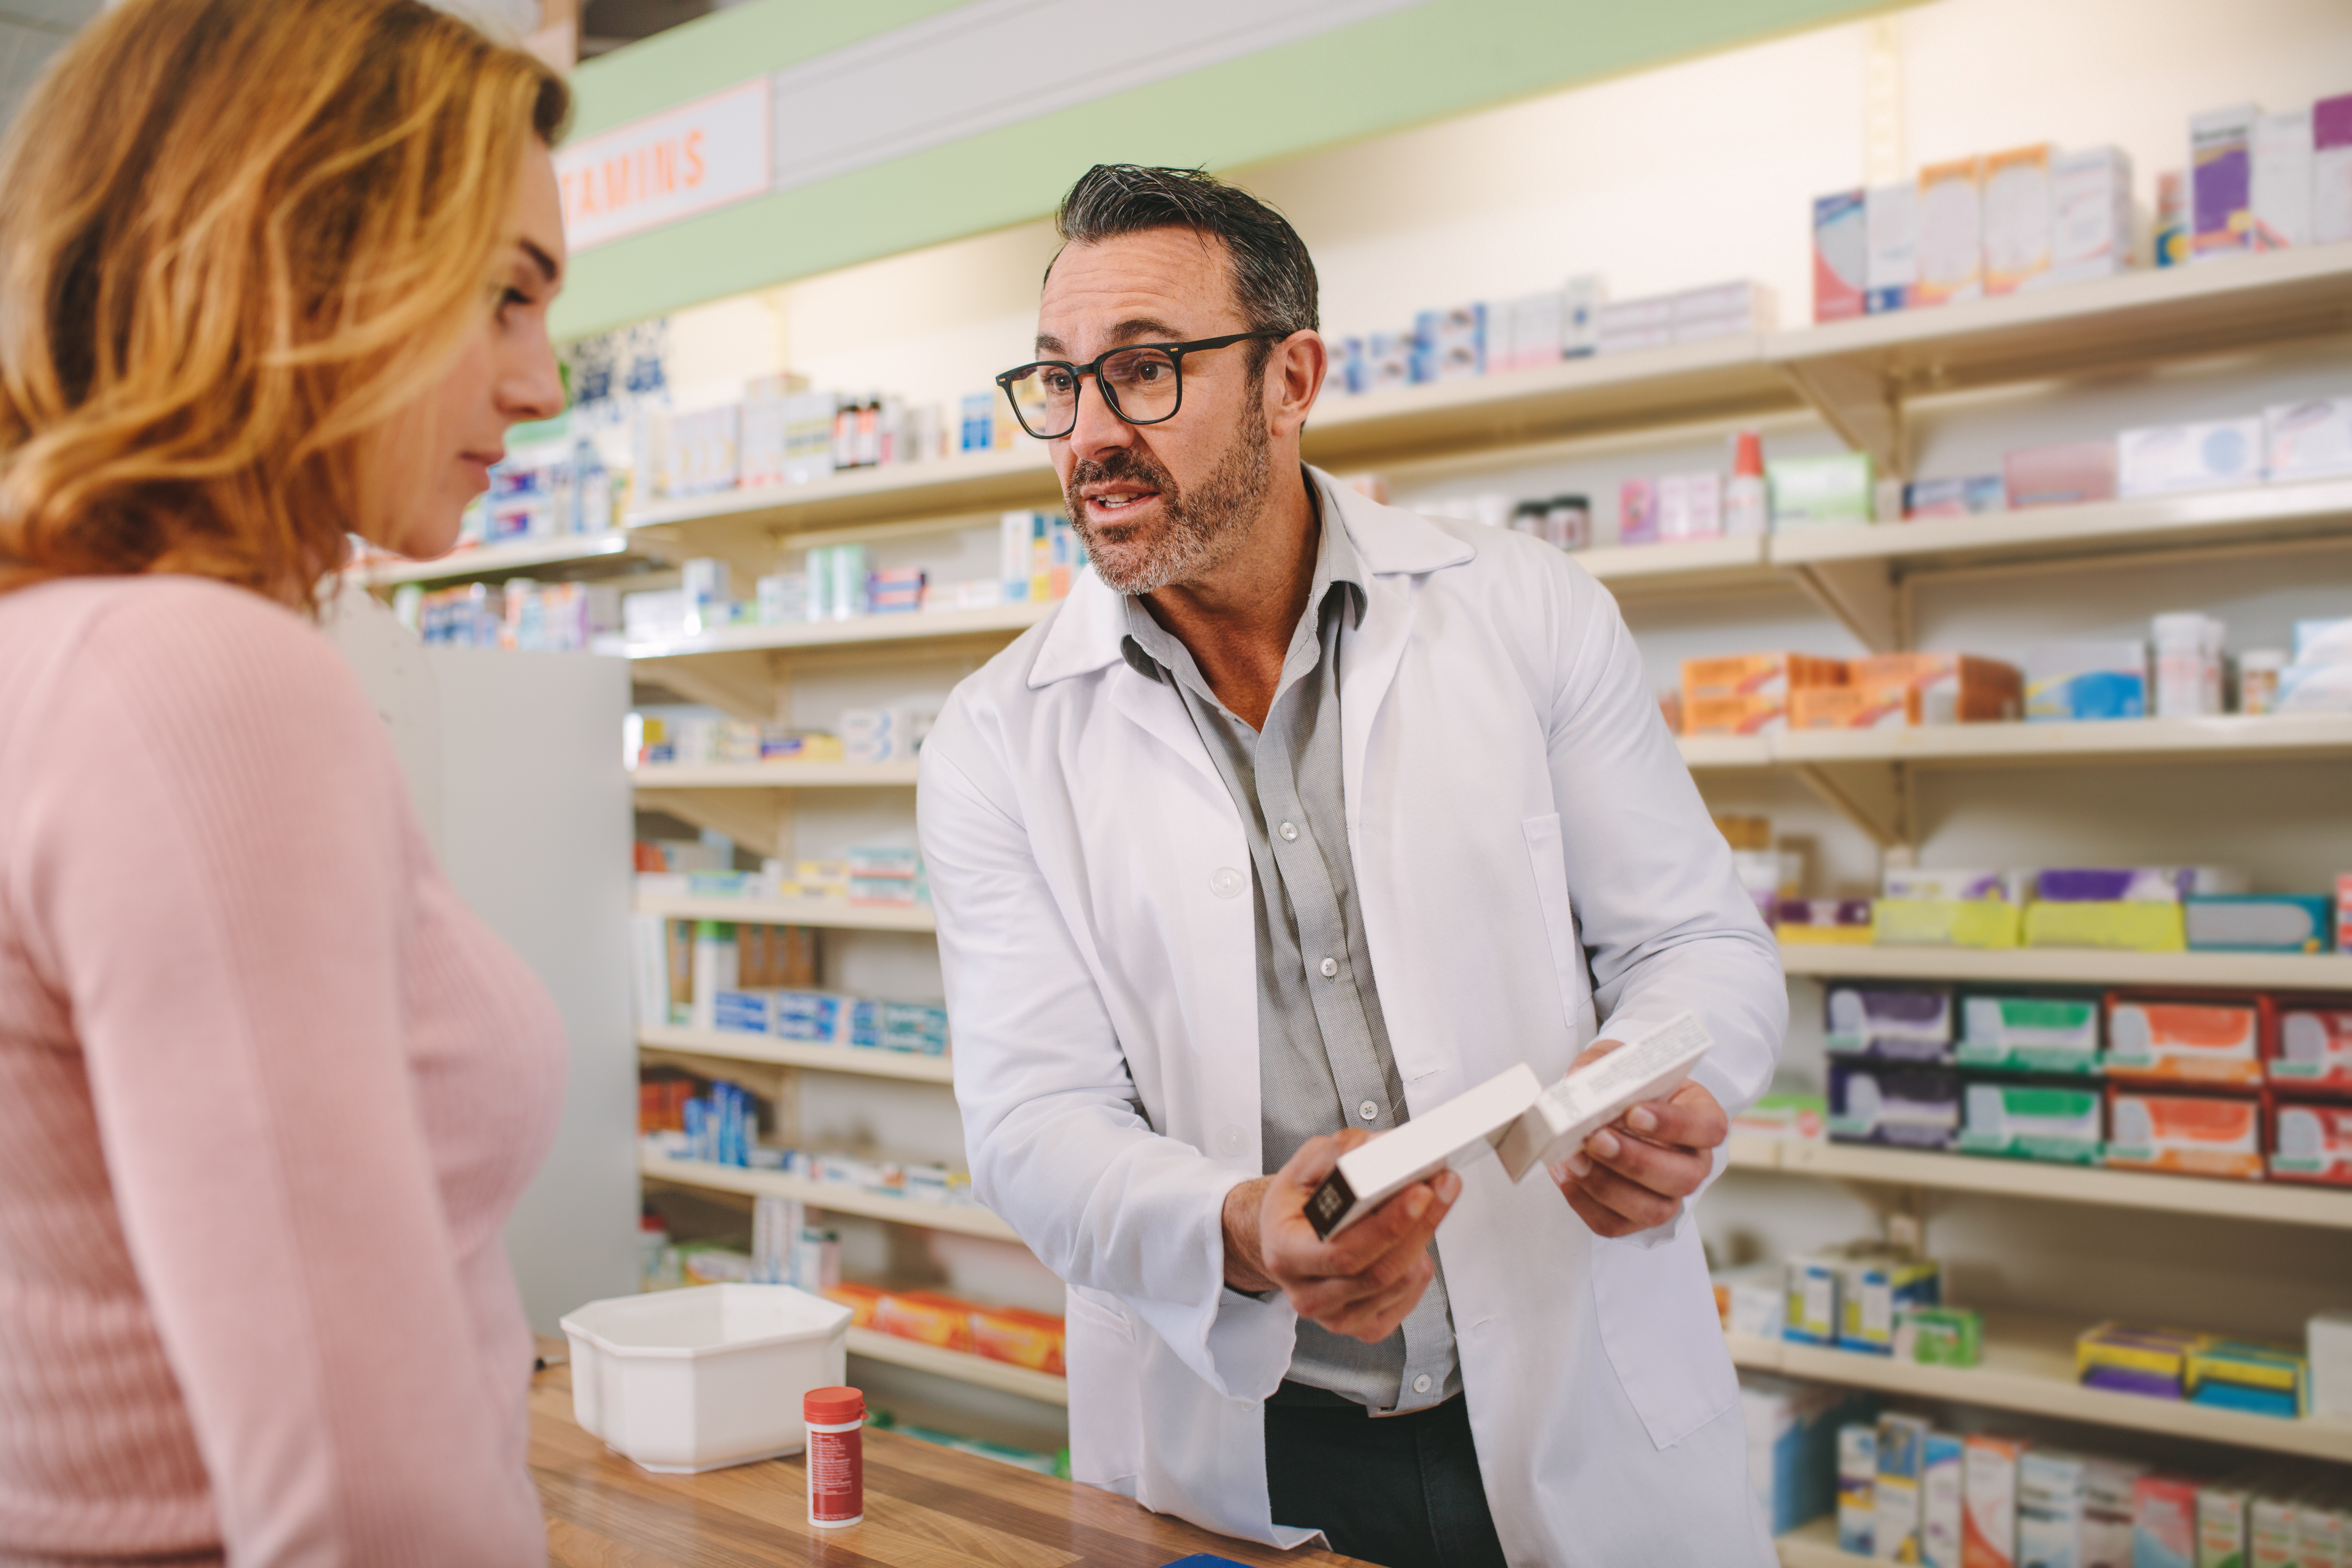 It’s Not Your Imagination: There Really Is More News Than Ever on Retail Efforts to Break into Healthcare